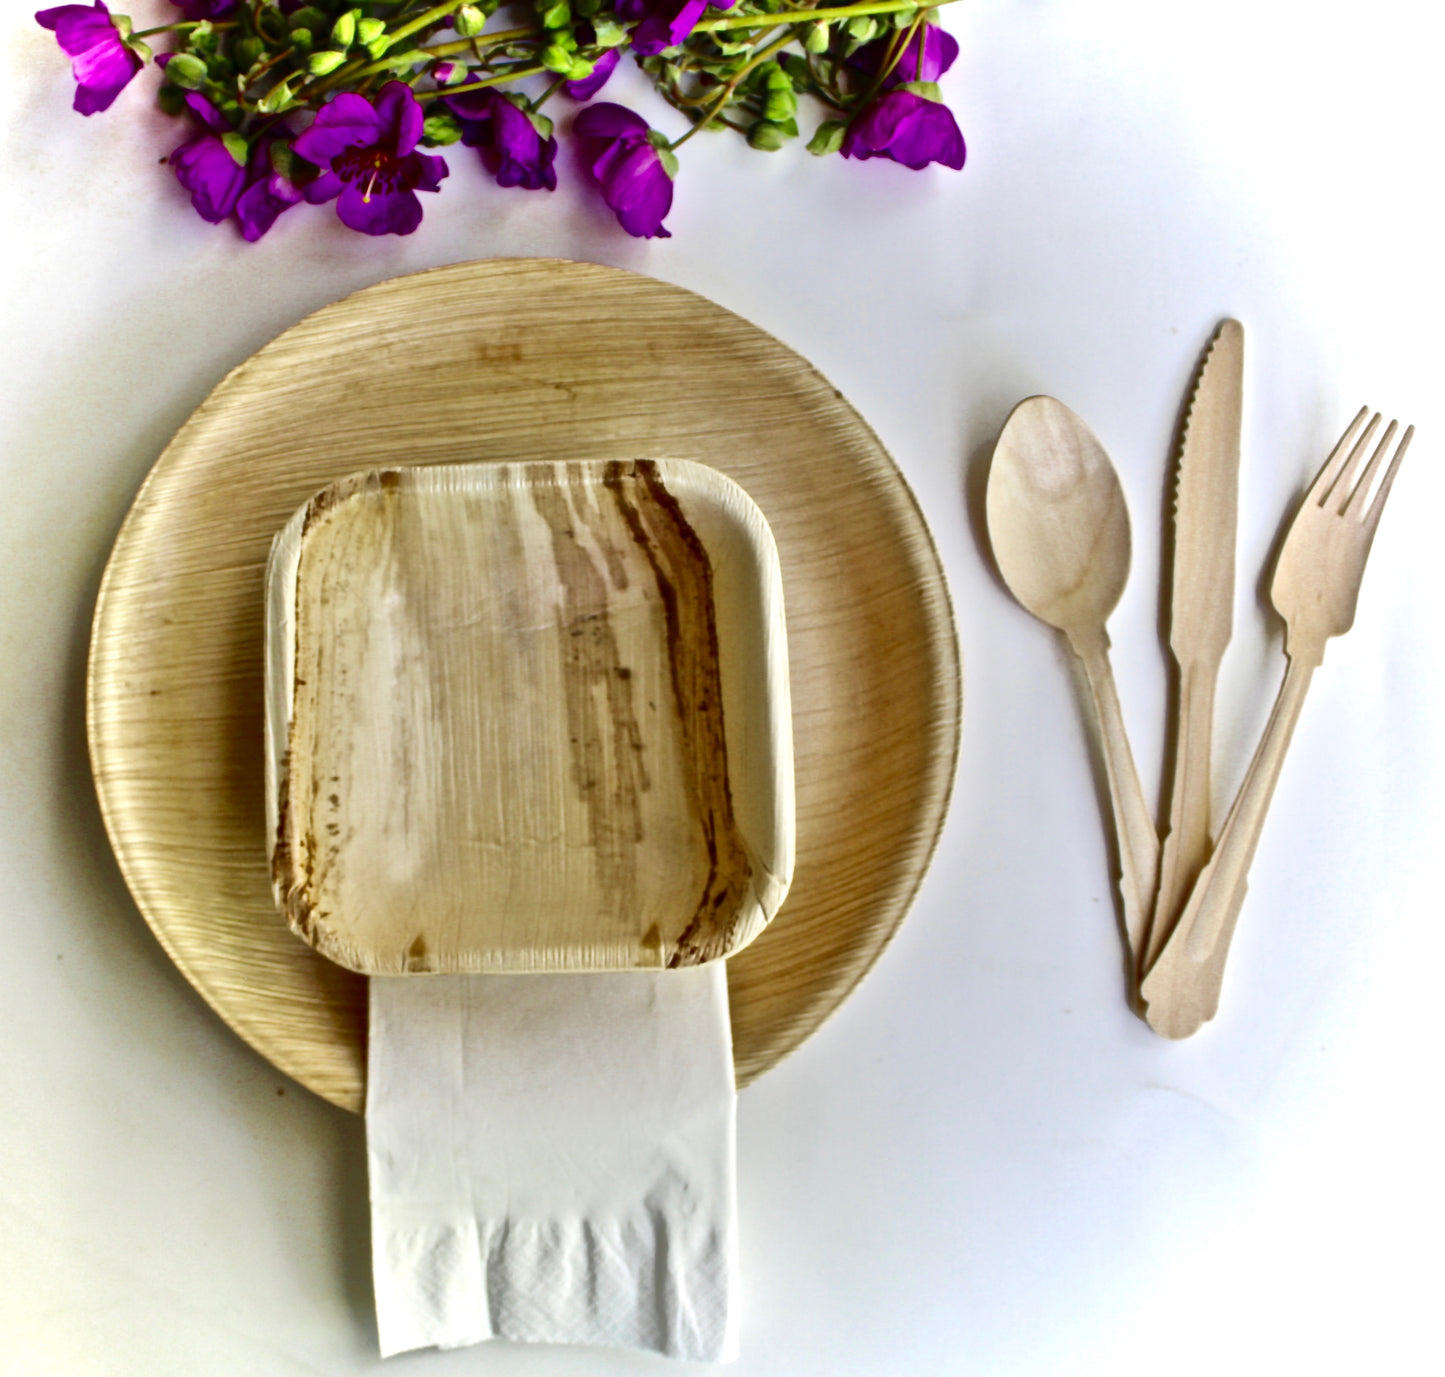 Copy of Copy of Bamboo Type Palm Leaf plates 25 Pice 10" Square - 25  pic Cup Paper  75 Pic cutlery  and 30  pice Napkin